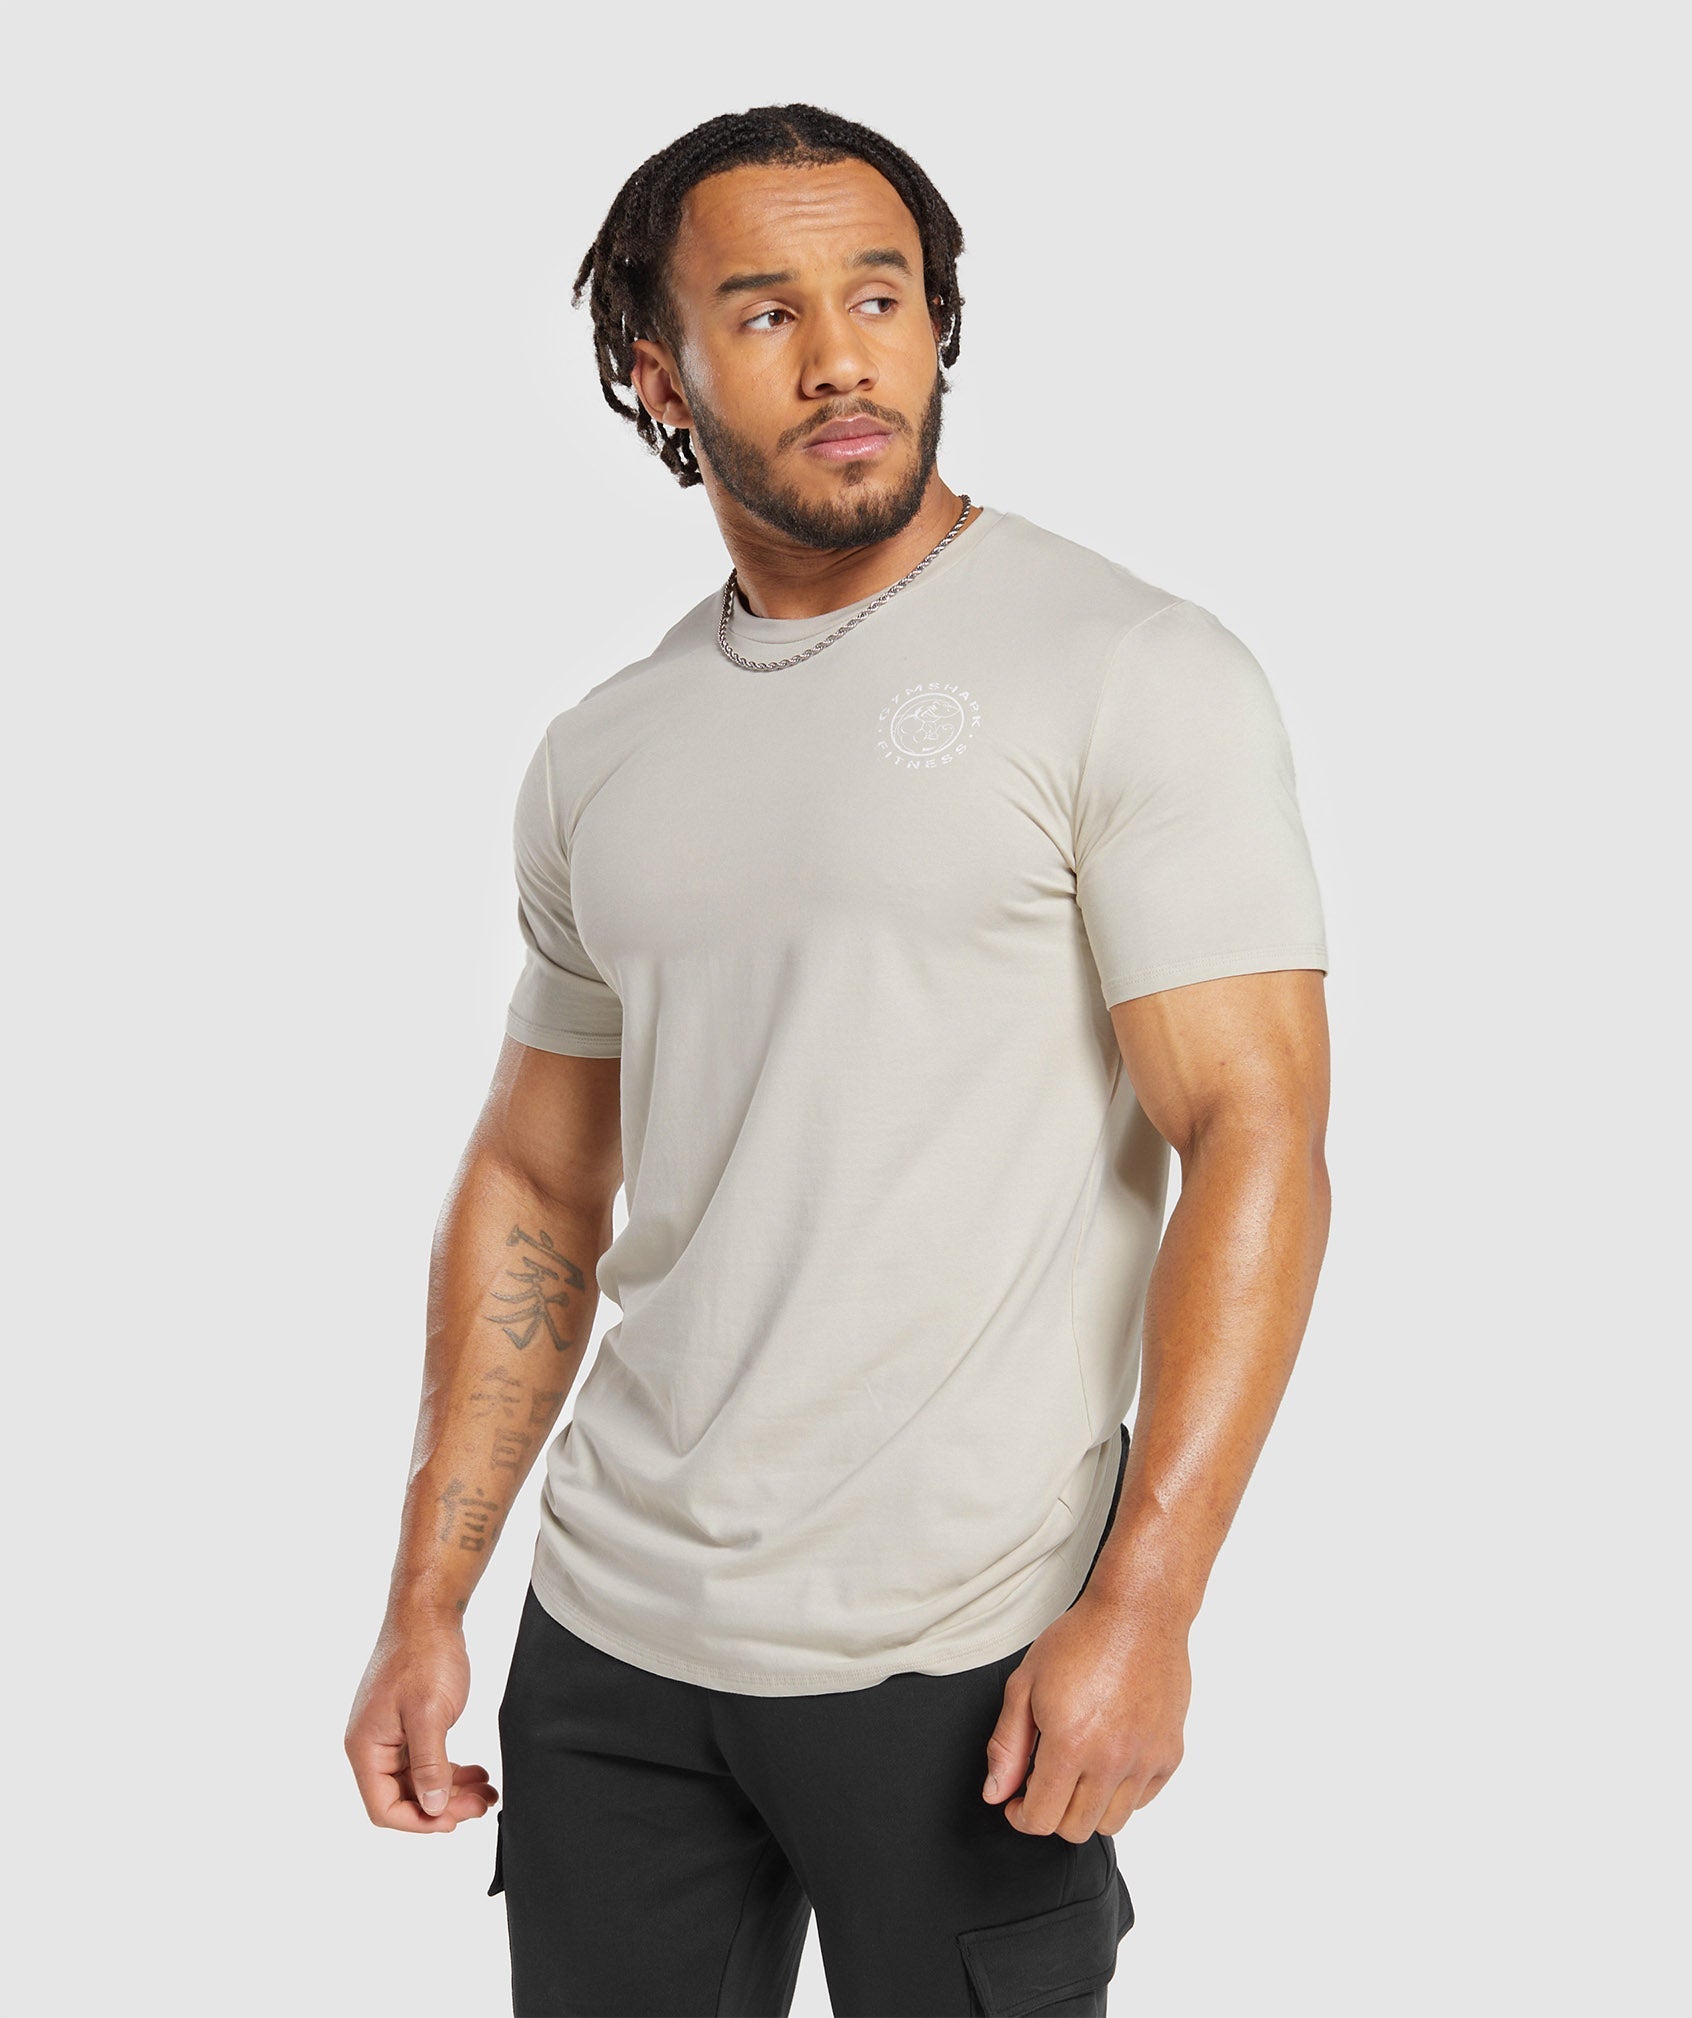 Legacy T-Shirt in Pebble Grey - view 3